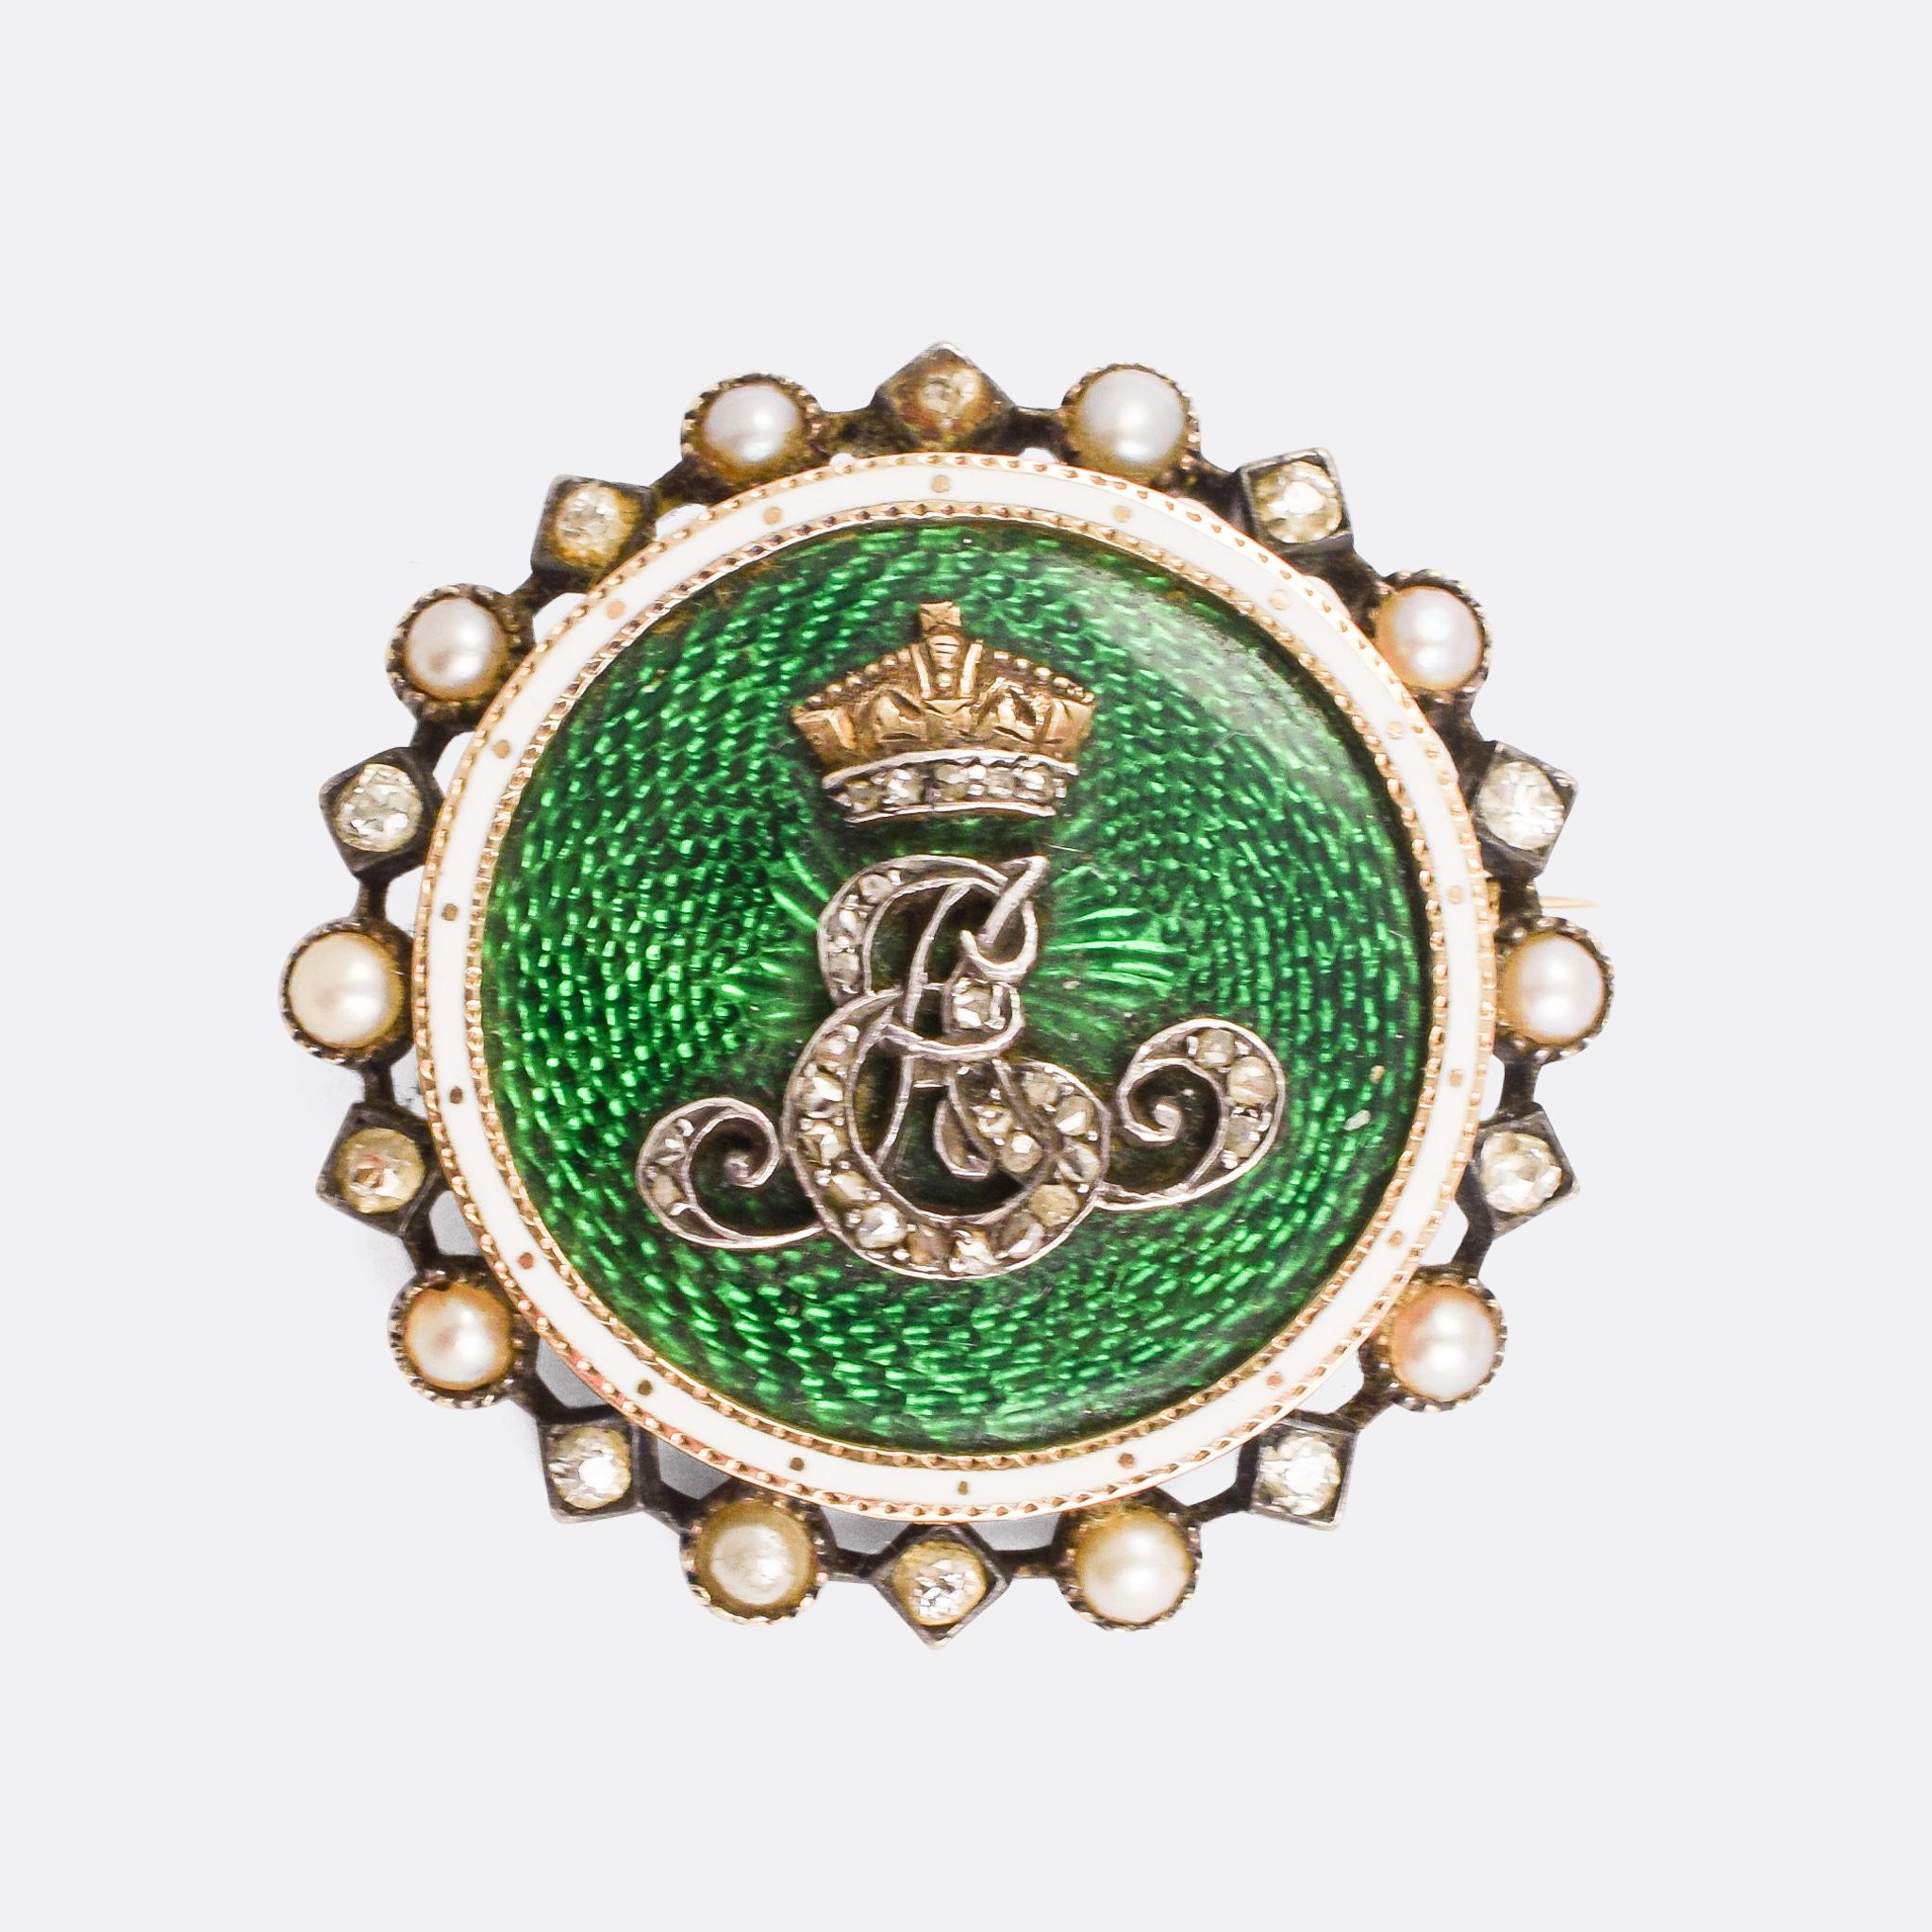 An especially lovely Edwardian  pendant and brooch suite with the original tooled leather presentation box. The pieces both feature stunning green guilloché enameling within a white enamel border, and to the centre royal cypher of King Edward VII.